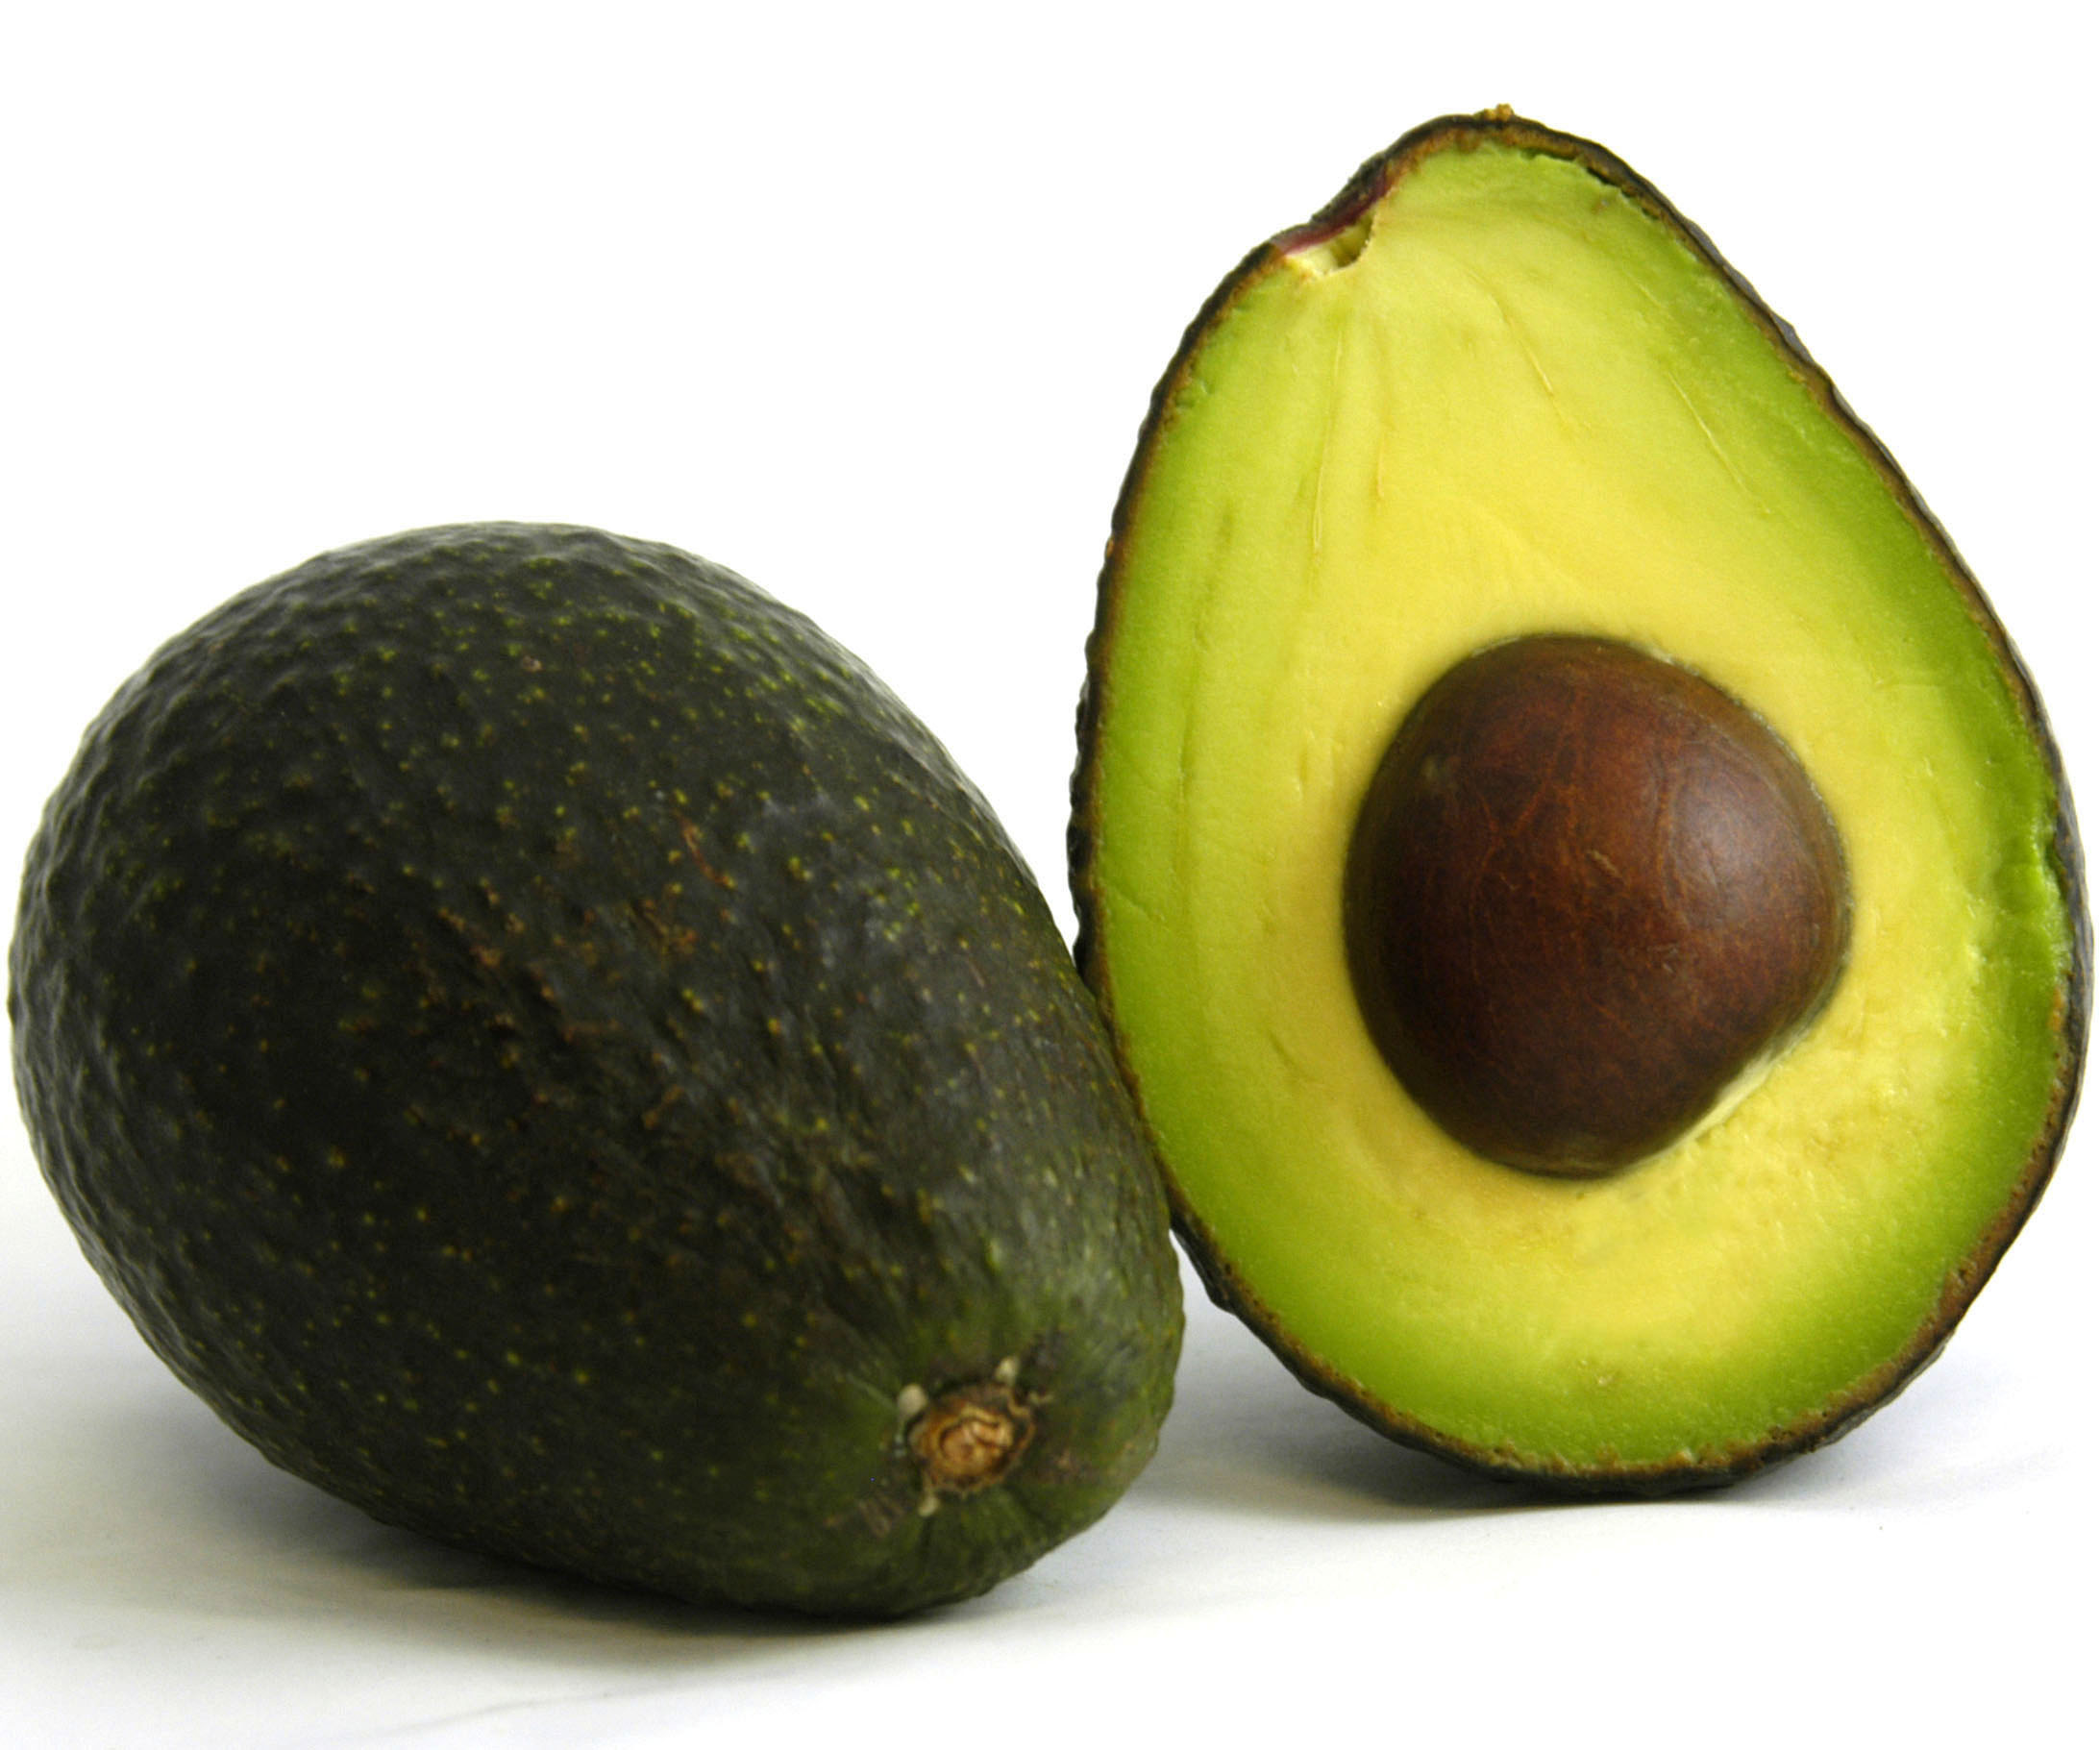 4 Reasons Avocado Is About to Become Your New Favorite Beauty Trick